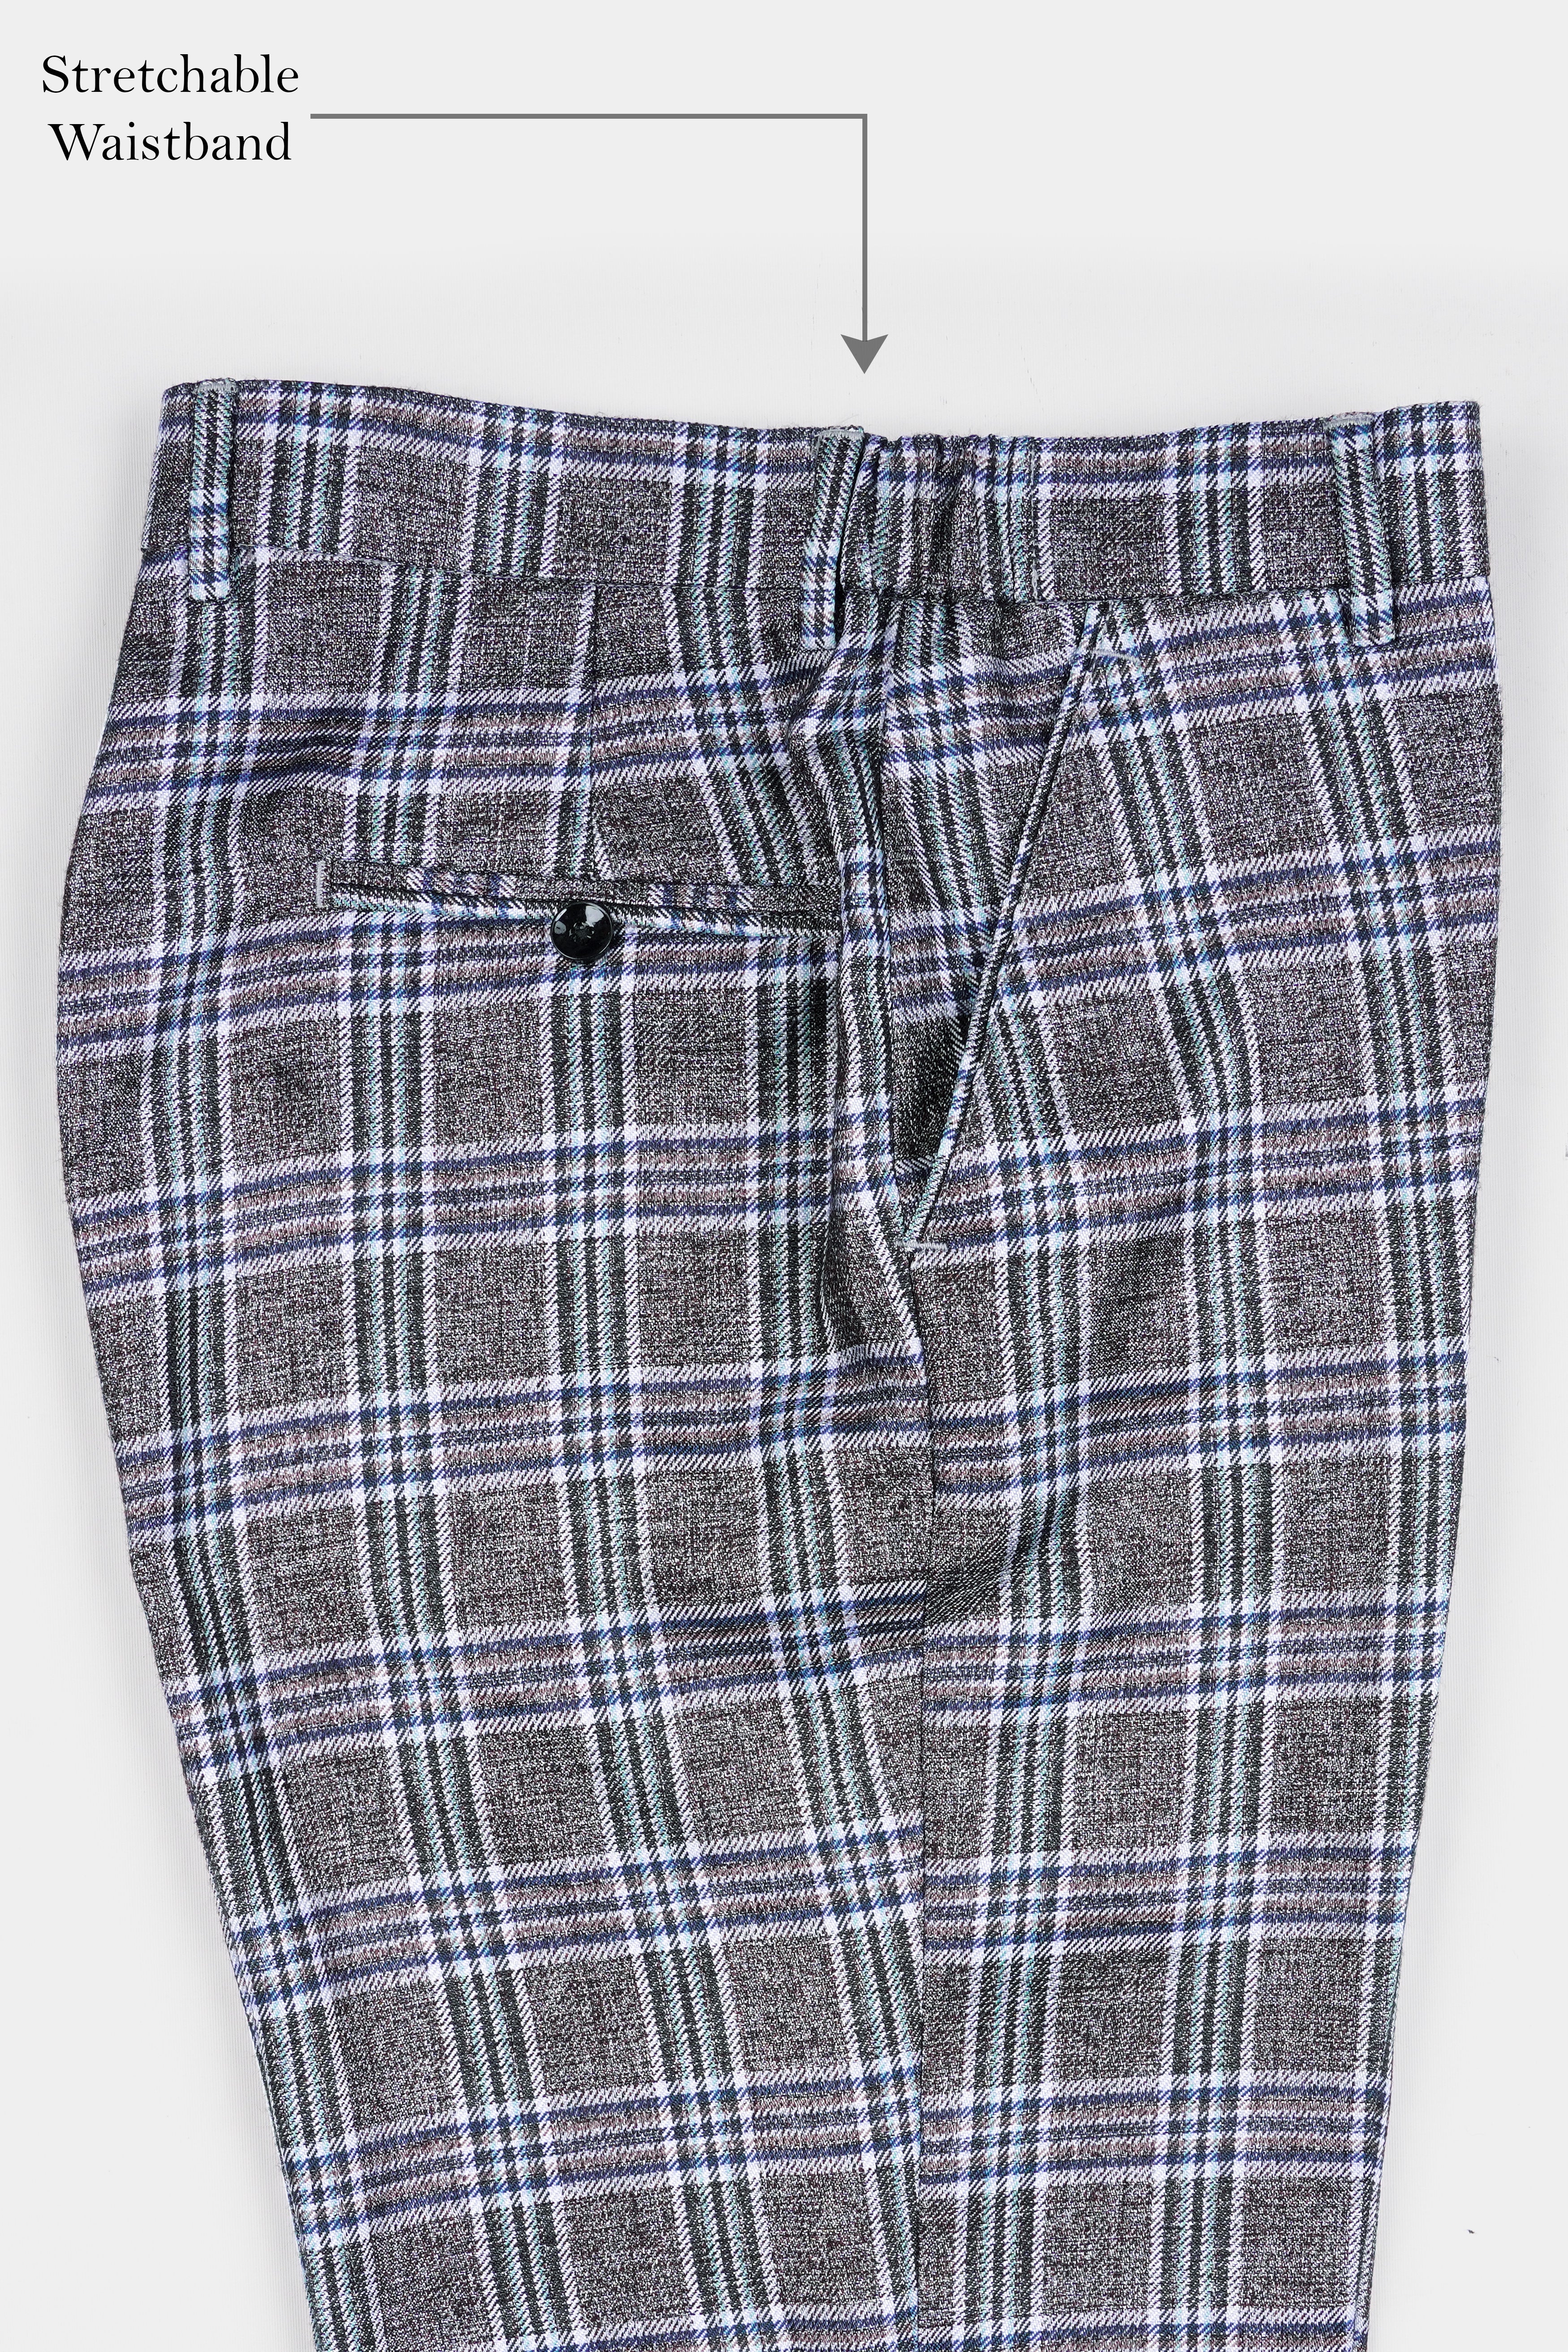 Ironside Grey and Cloud Burst Blue Plaid Wool Rich Stretchable Waistband Pant T3073-SW-28, T3073-SW-30, T3073-SW-32, T3073-SW-34, T3073-SW-36, T3073-SW-38, T3073-SW-40, T3073-SW-42, T3073-SW-44